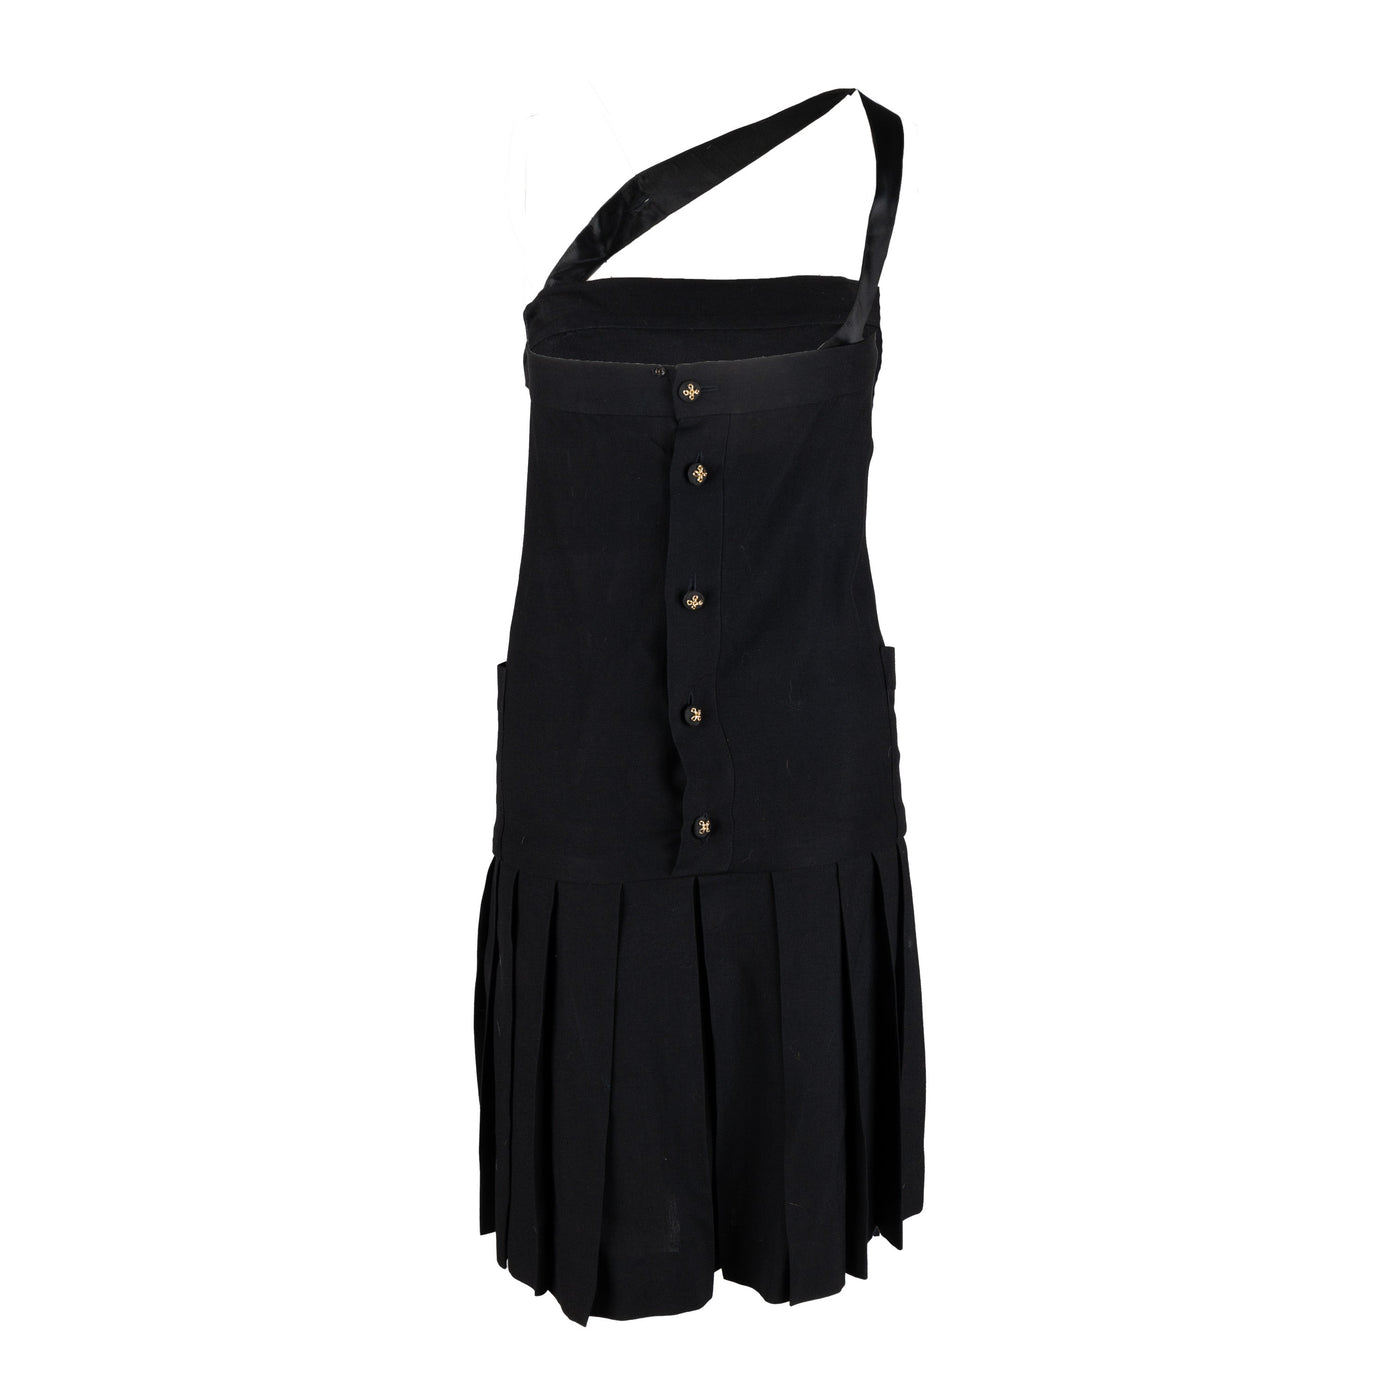 Secondhand Chanel Pleated Dress with Strap